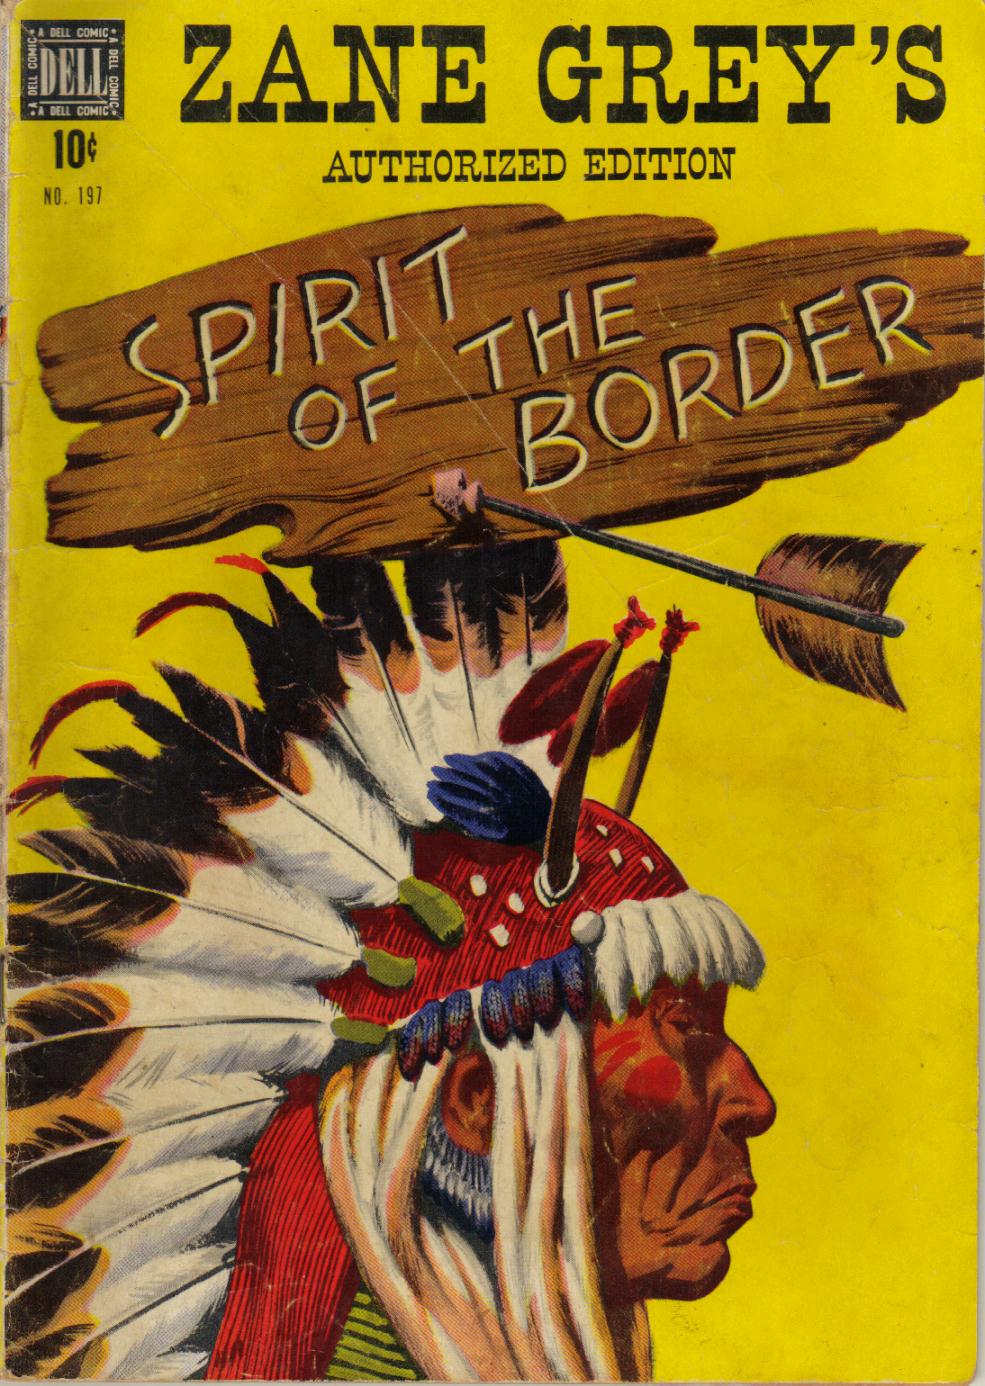 Book Cover For 0197 - Zane Grey's Spirit of the Border